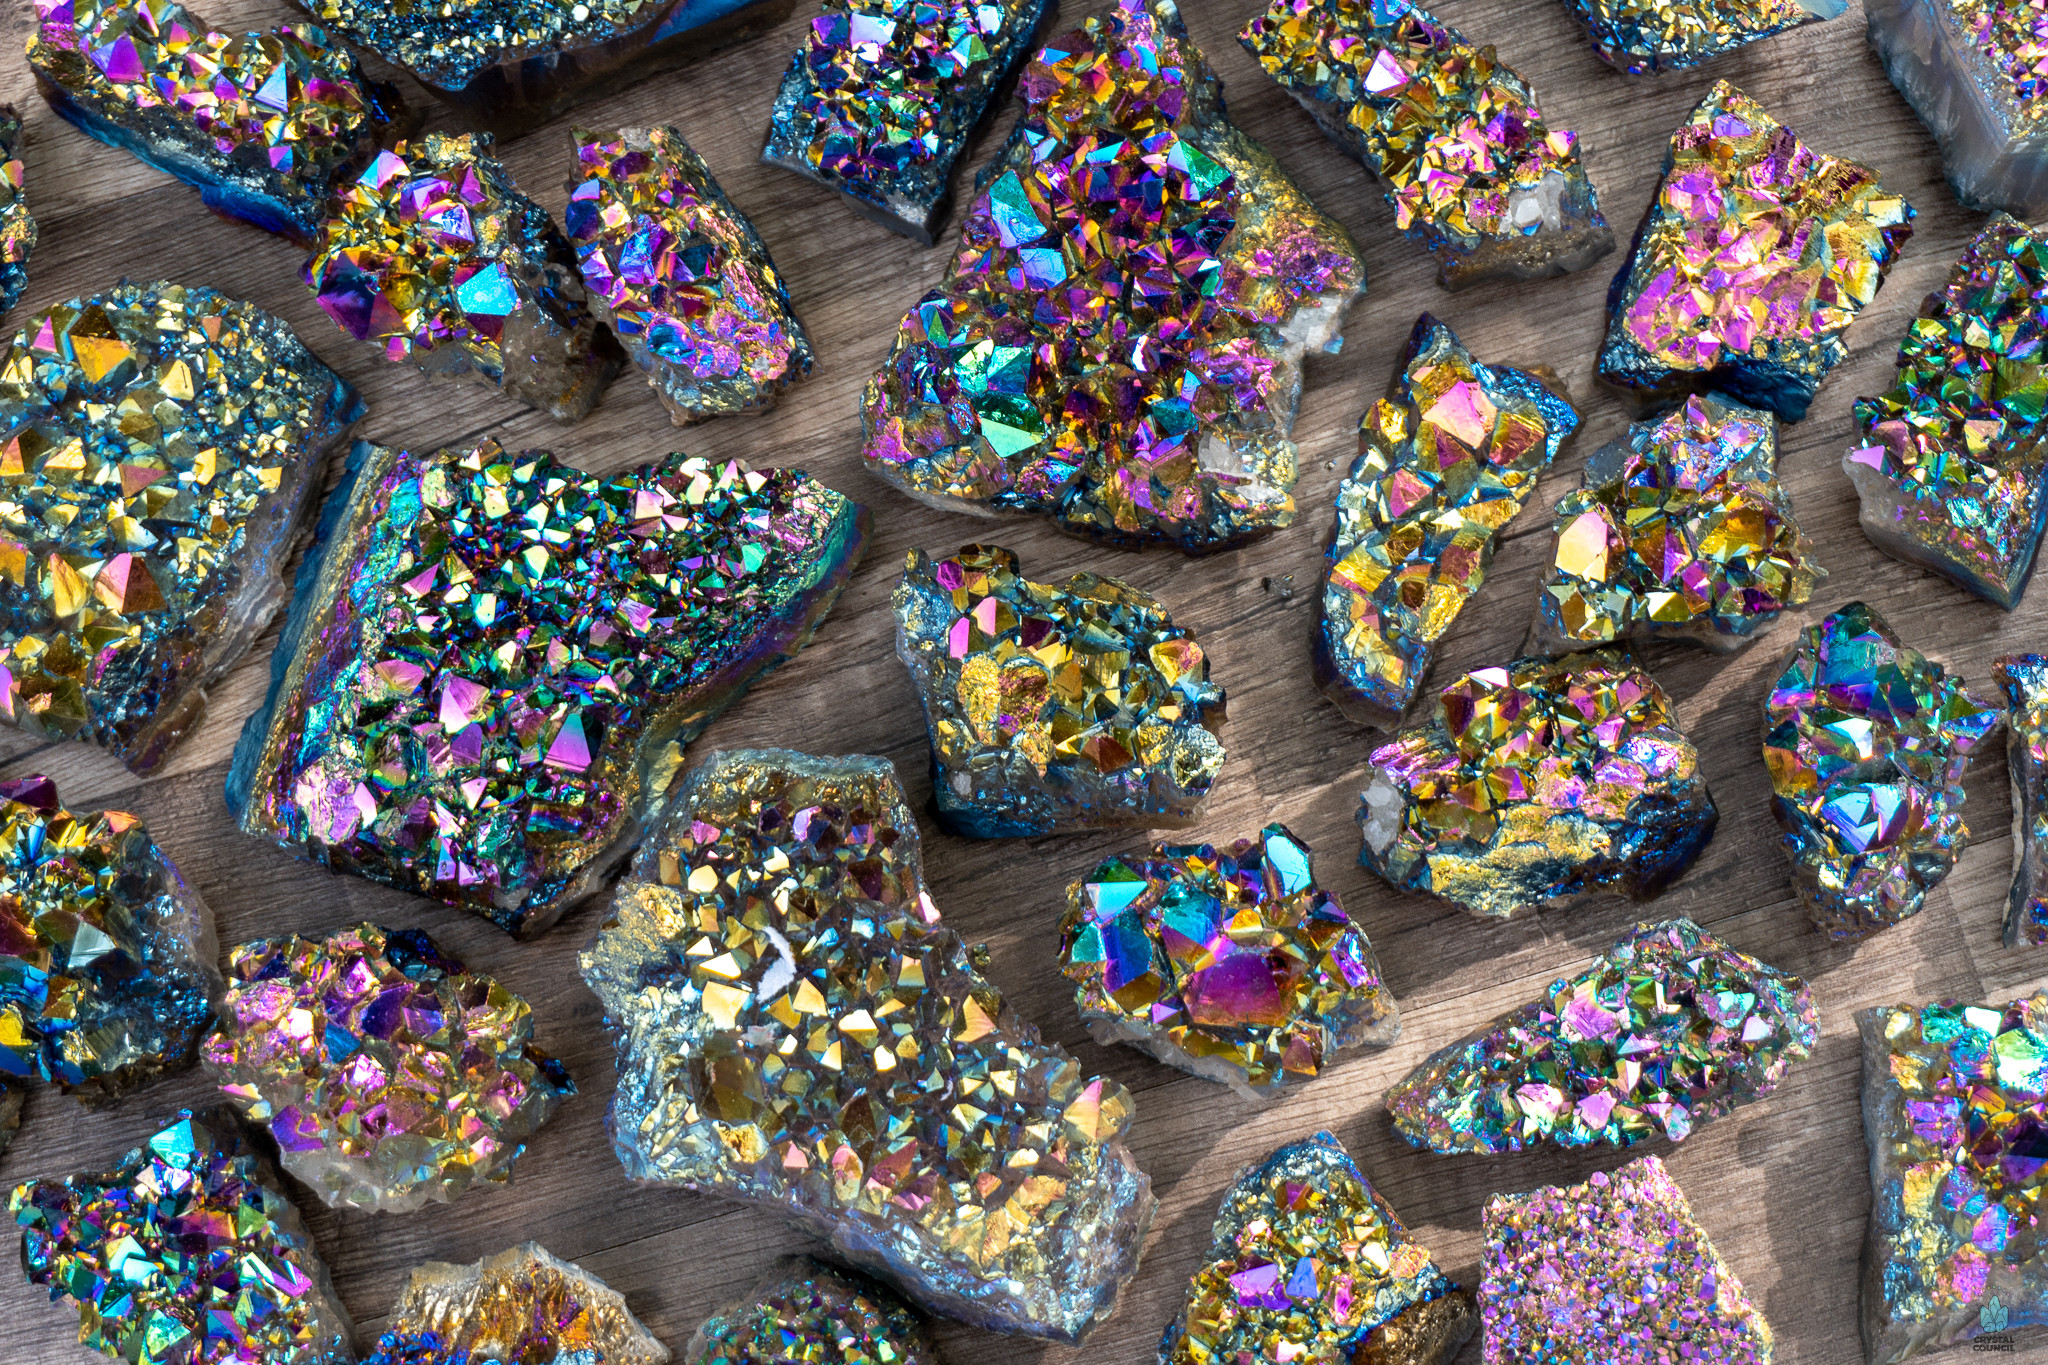 Titanium Quartz Meanings and Crystal Properties - The Crystal Council